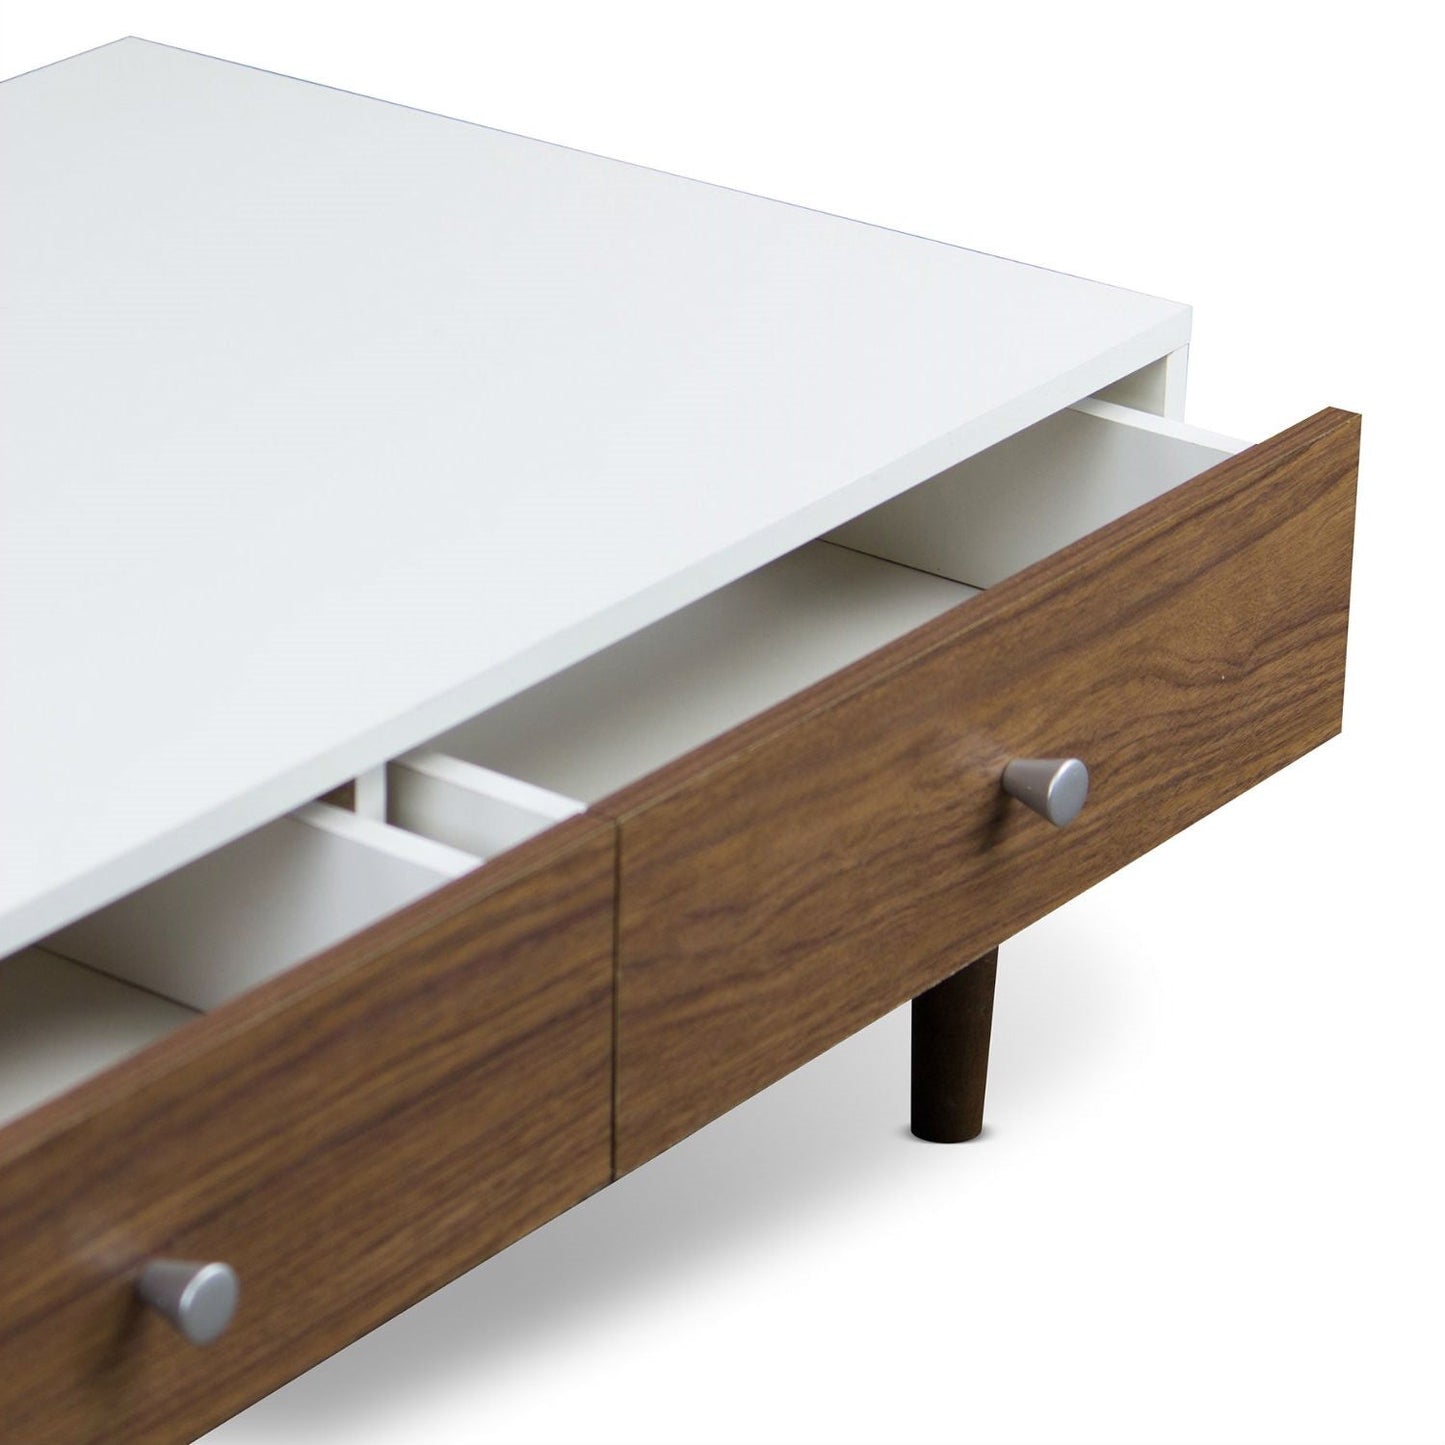 Living Room > Coffee Tables - Modern Mid-Century Style White Wood Coffee Table With 2 Drawers